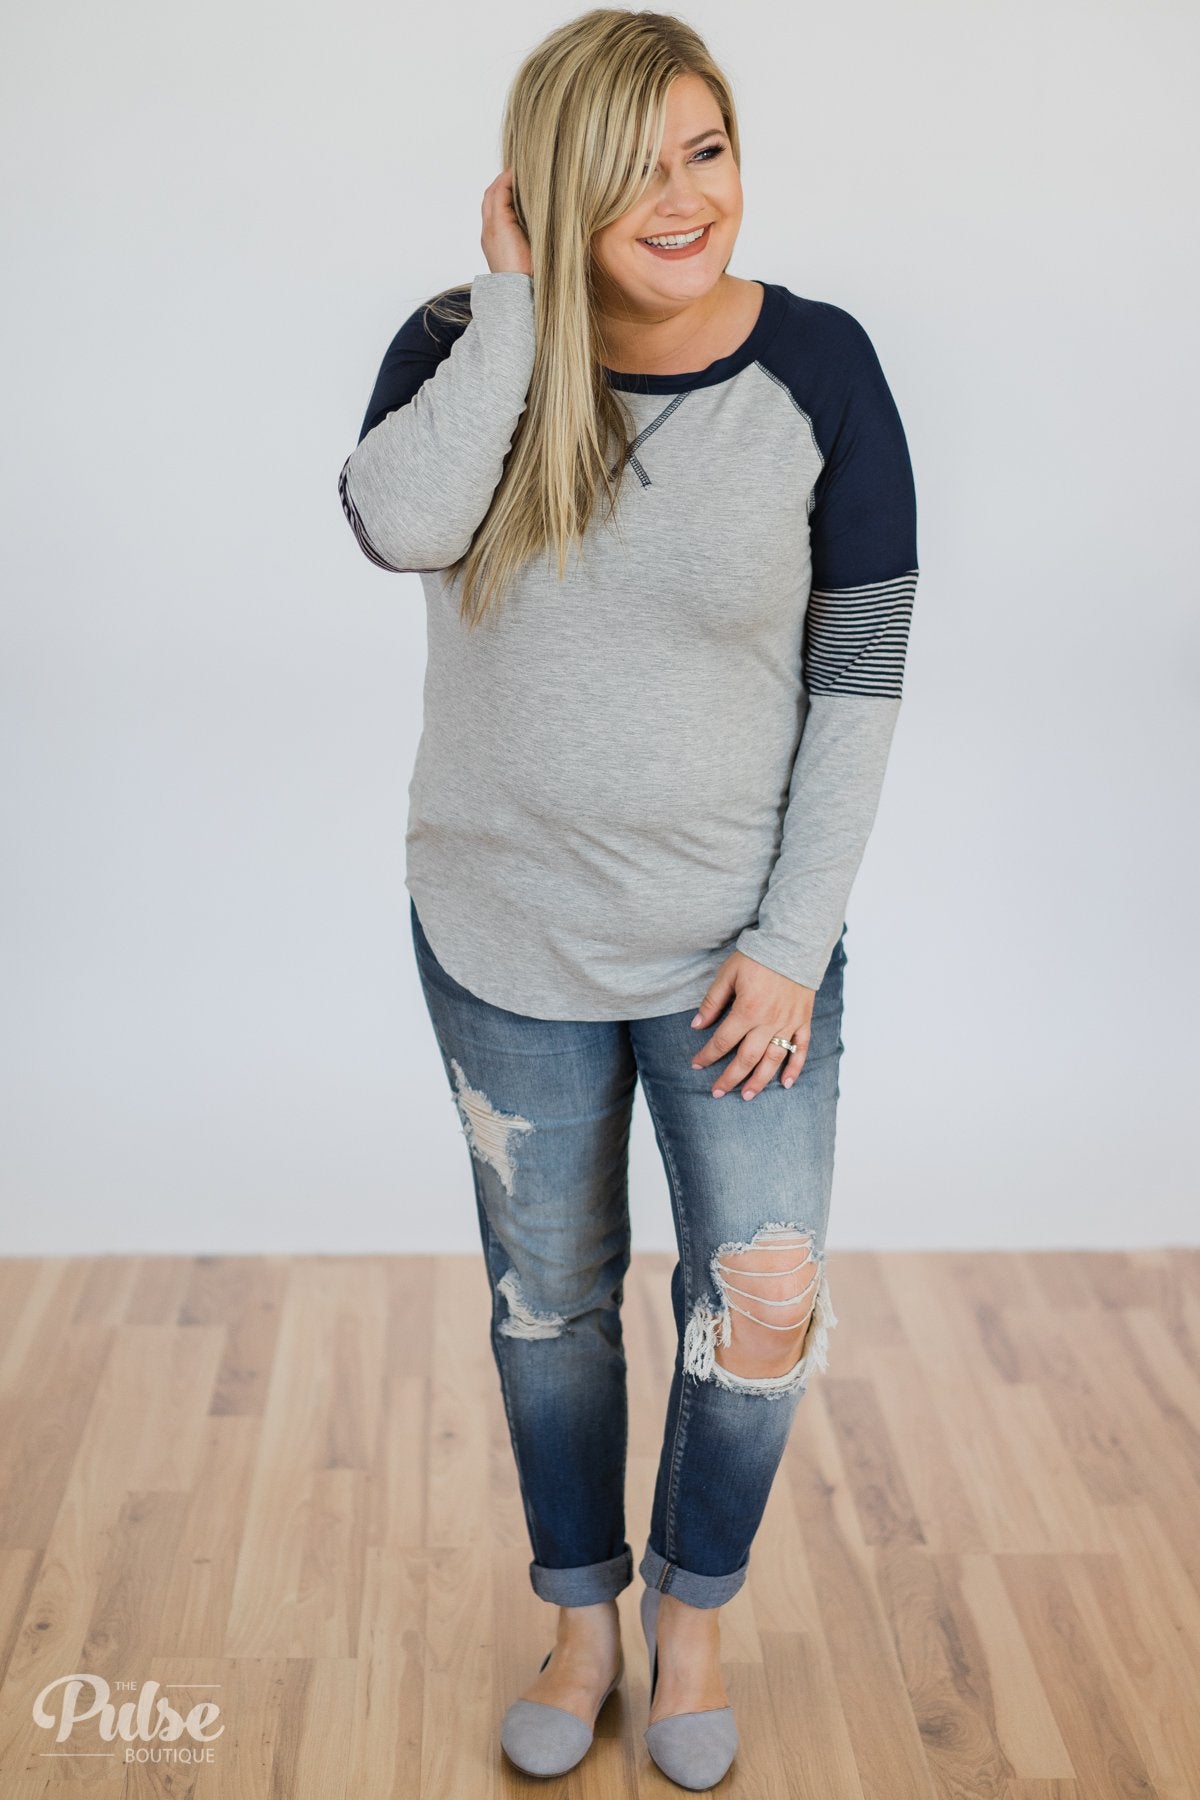 Hold on Tight Striped Sleeve Top- Heather Grey & Navy